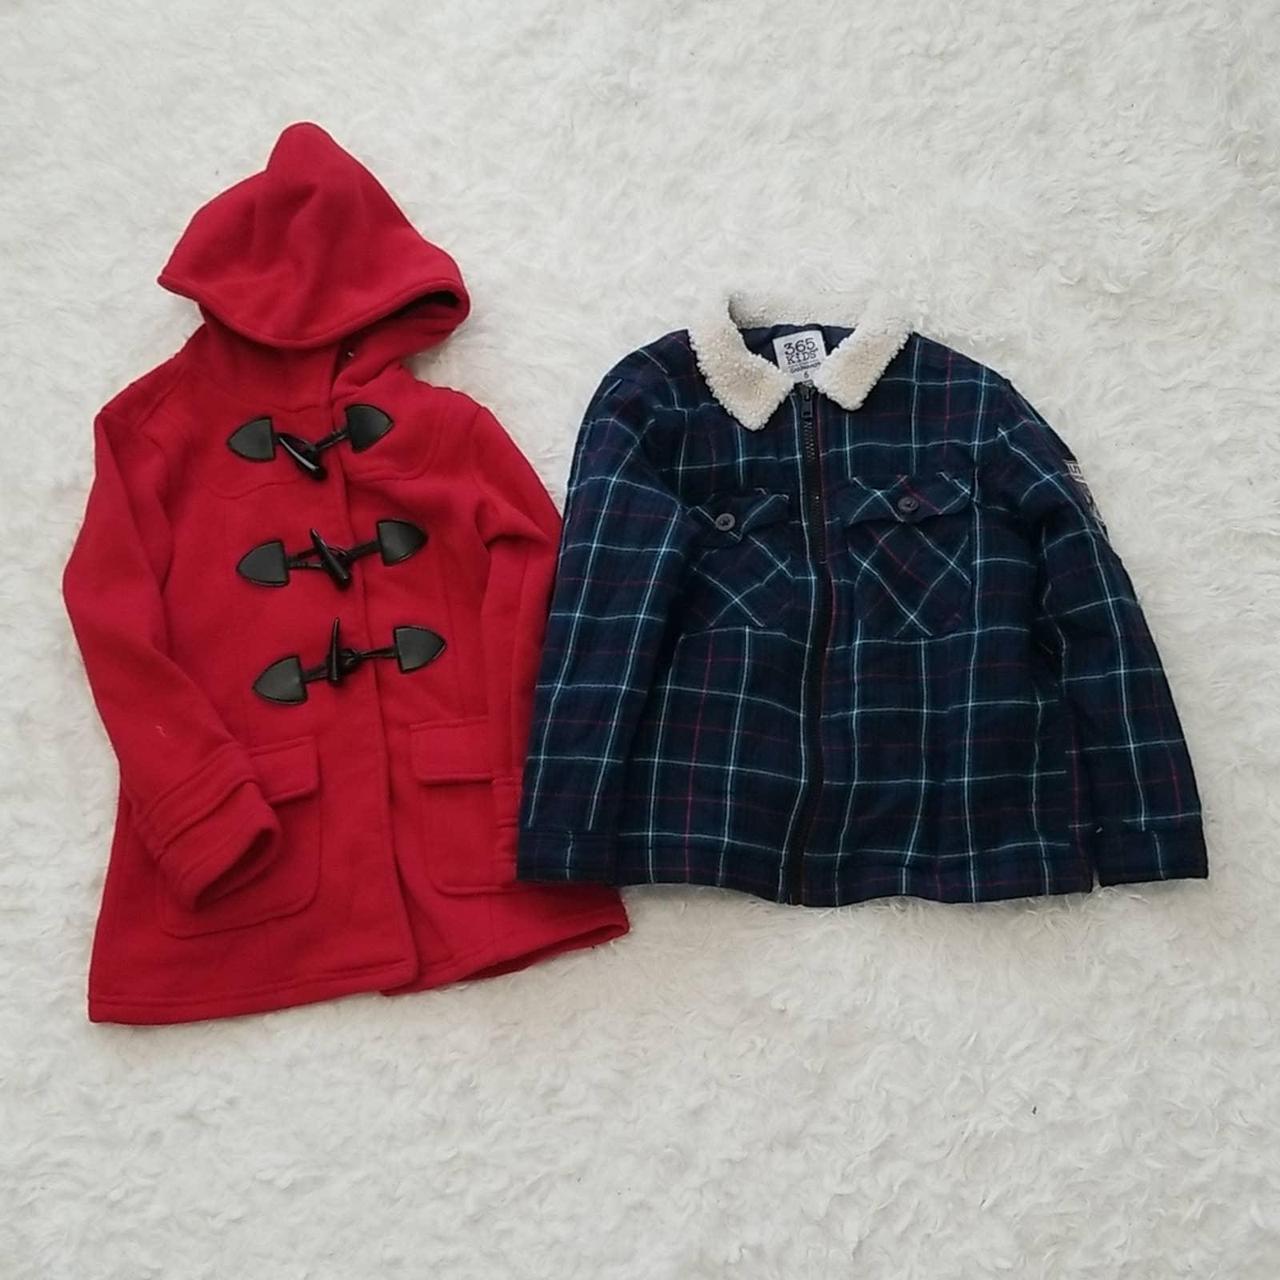 Product Image 2 - Preowned red Coat and Plaid